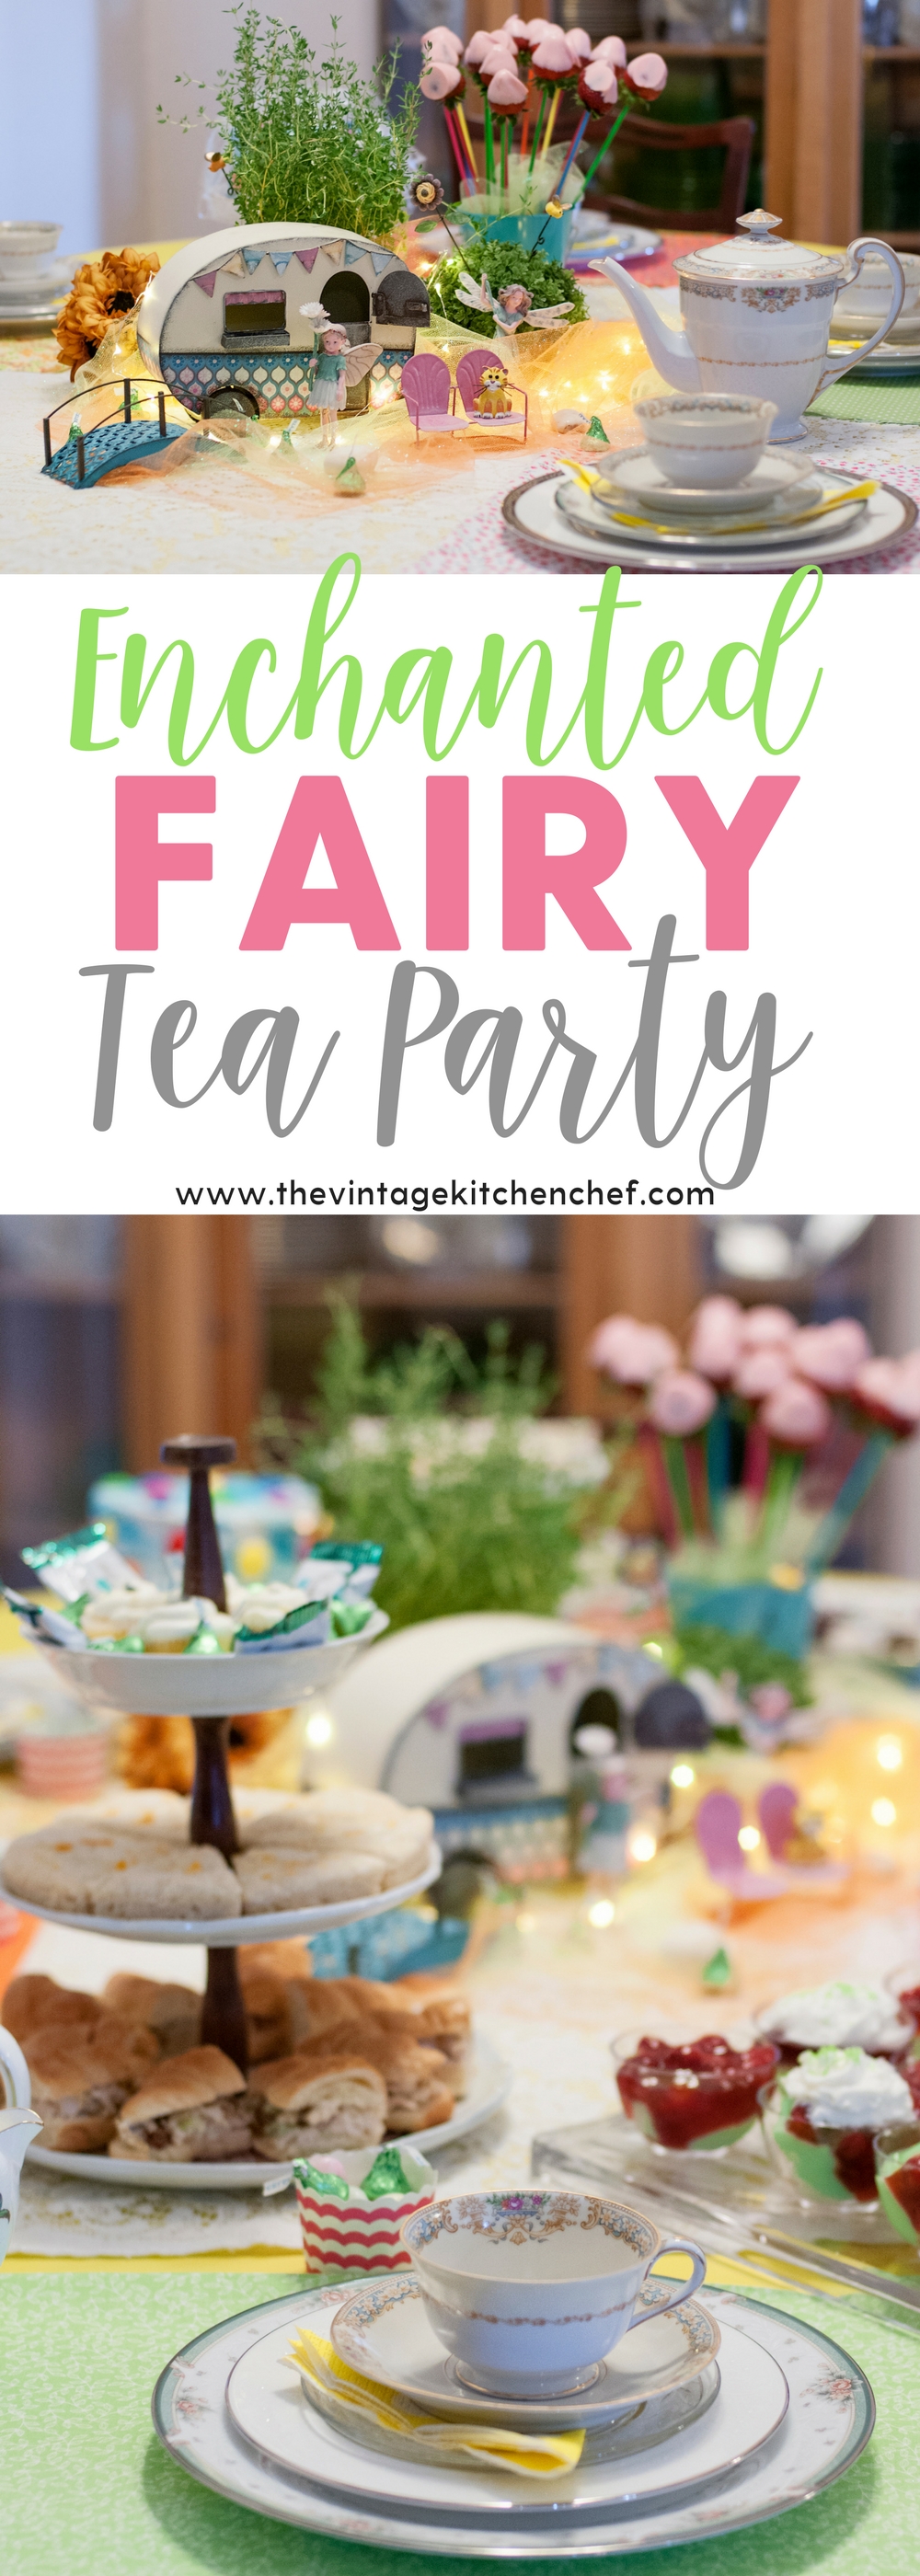 A bit of whimsy and a bit of elegance come together to create this Enchanted Fairy Tea party. What a lovely way to spend an afternoon!